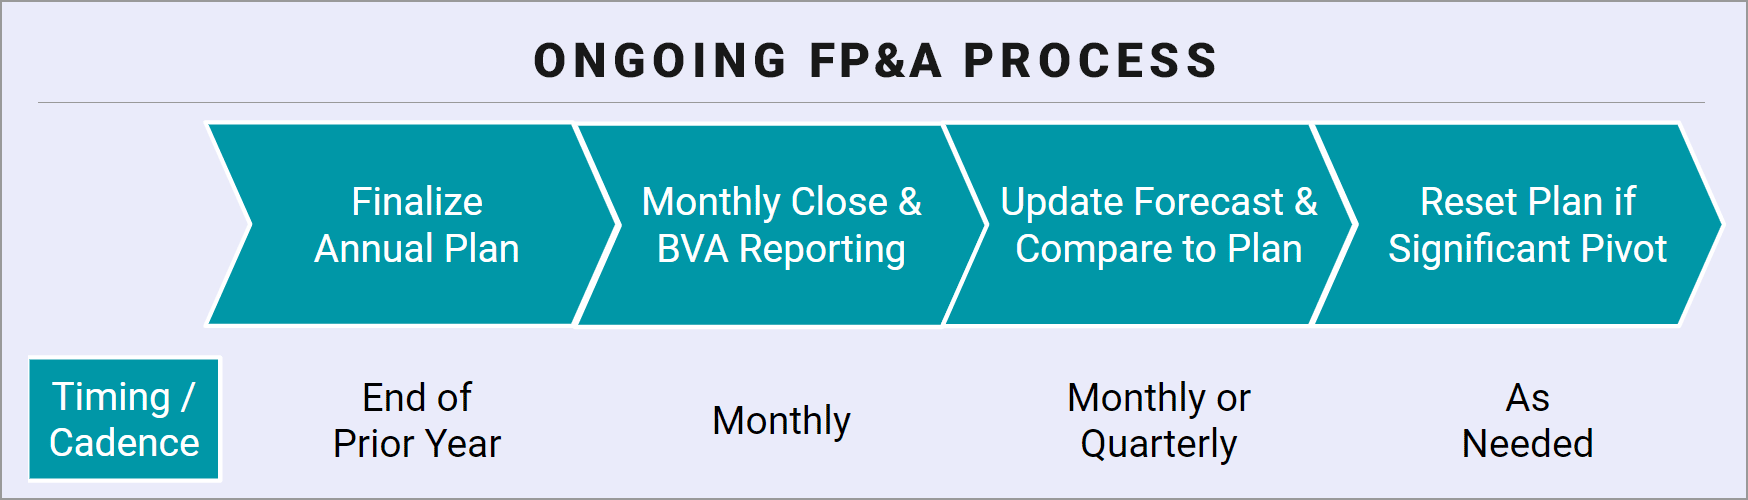 Ongoing Financial Planning and Analysis Process